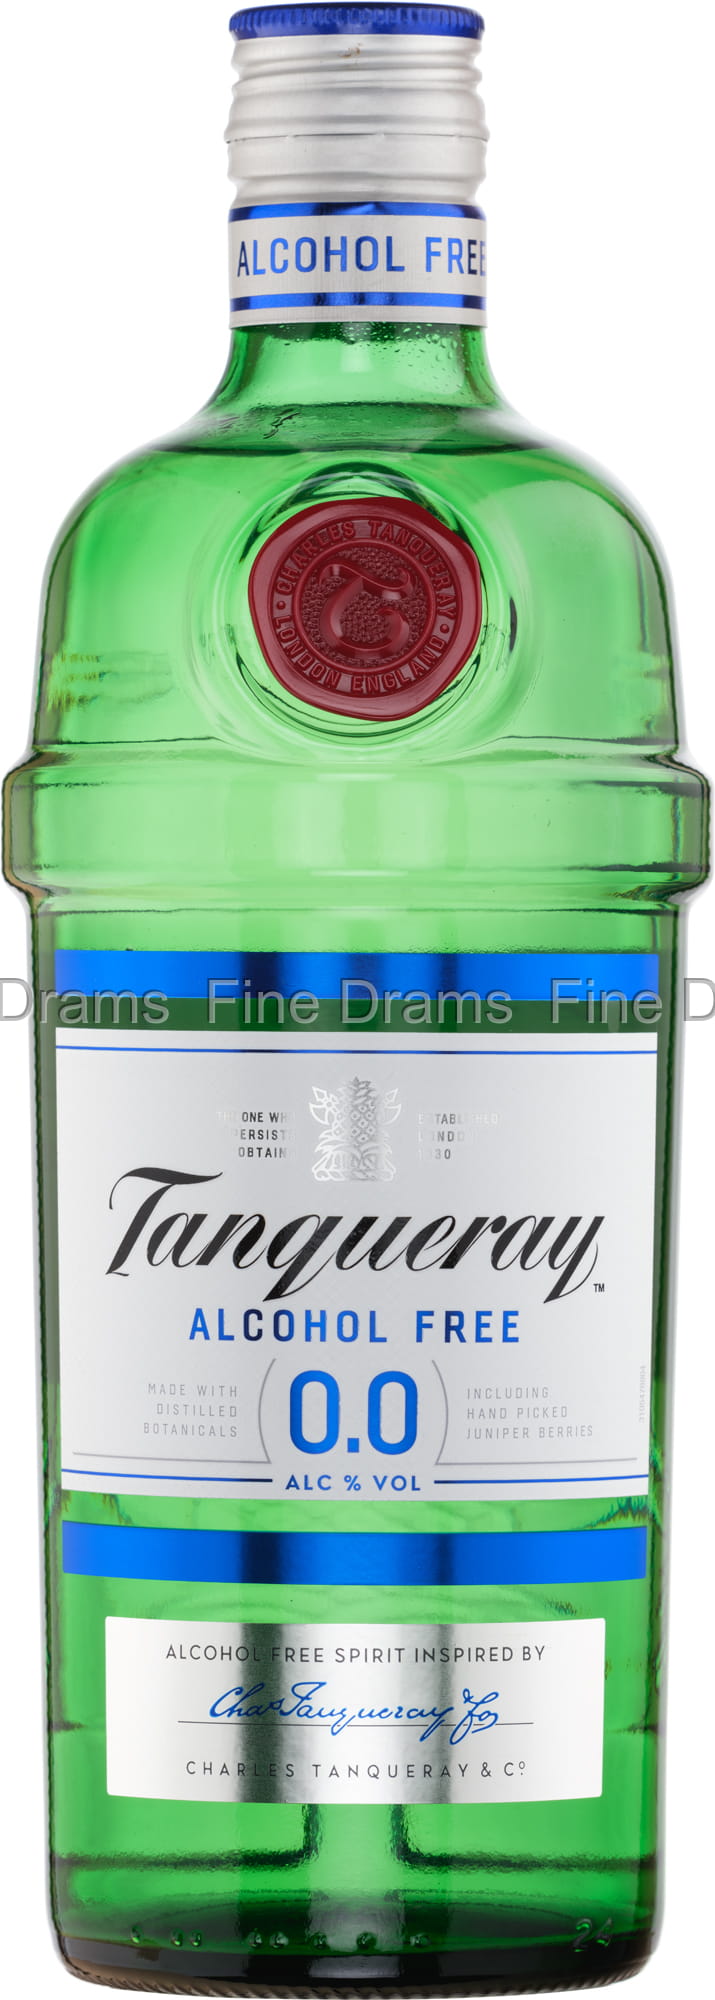 Gin Tanqueray 0.0% Free Alcohol